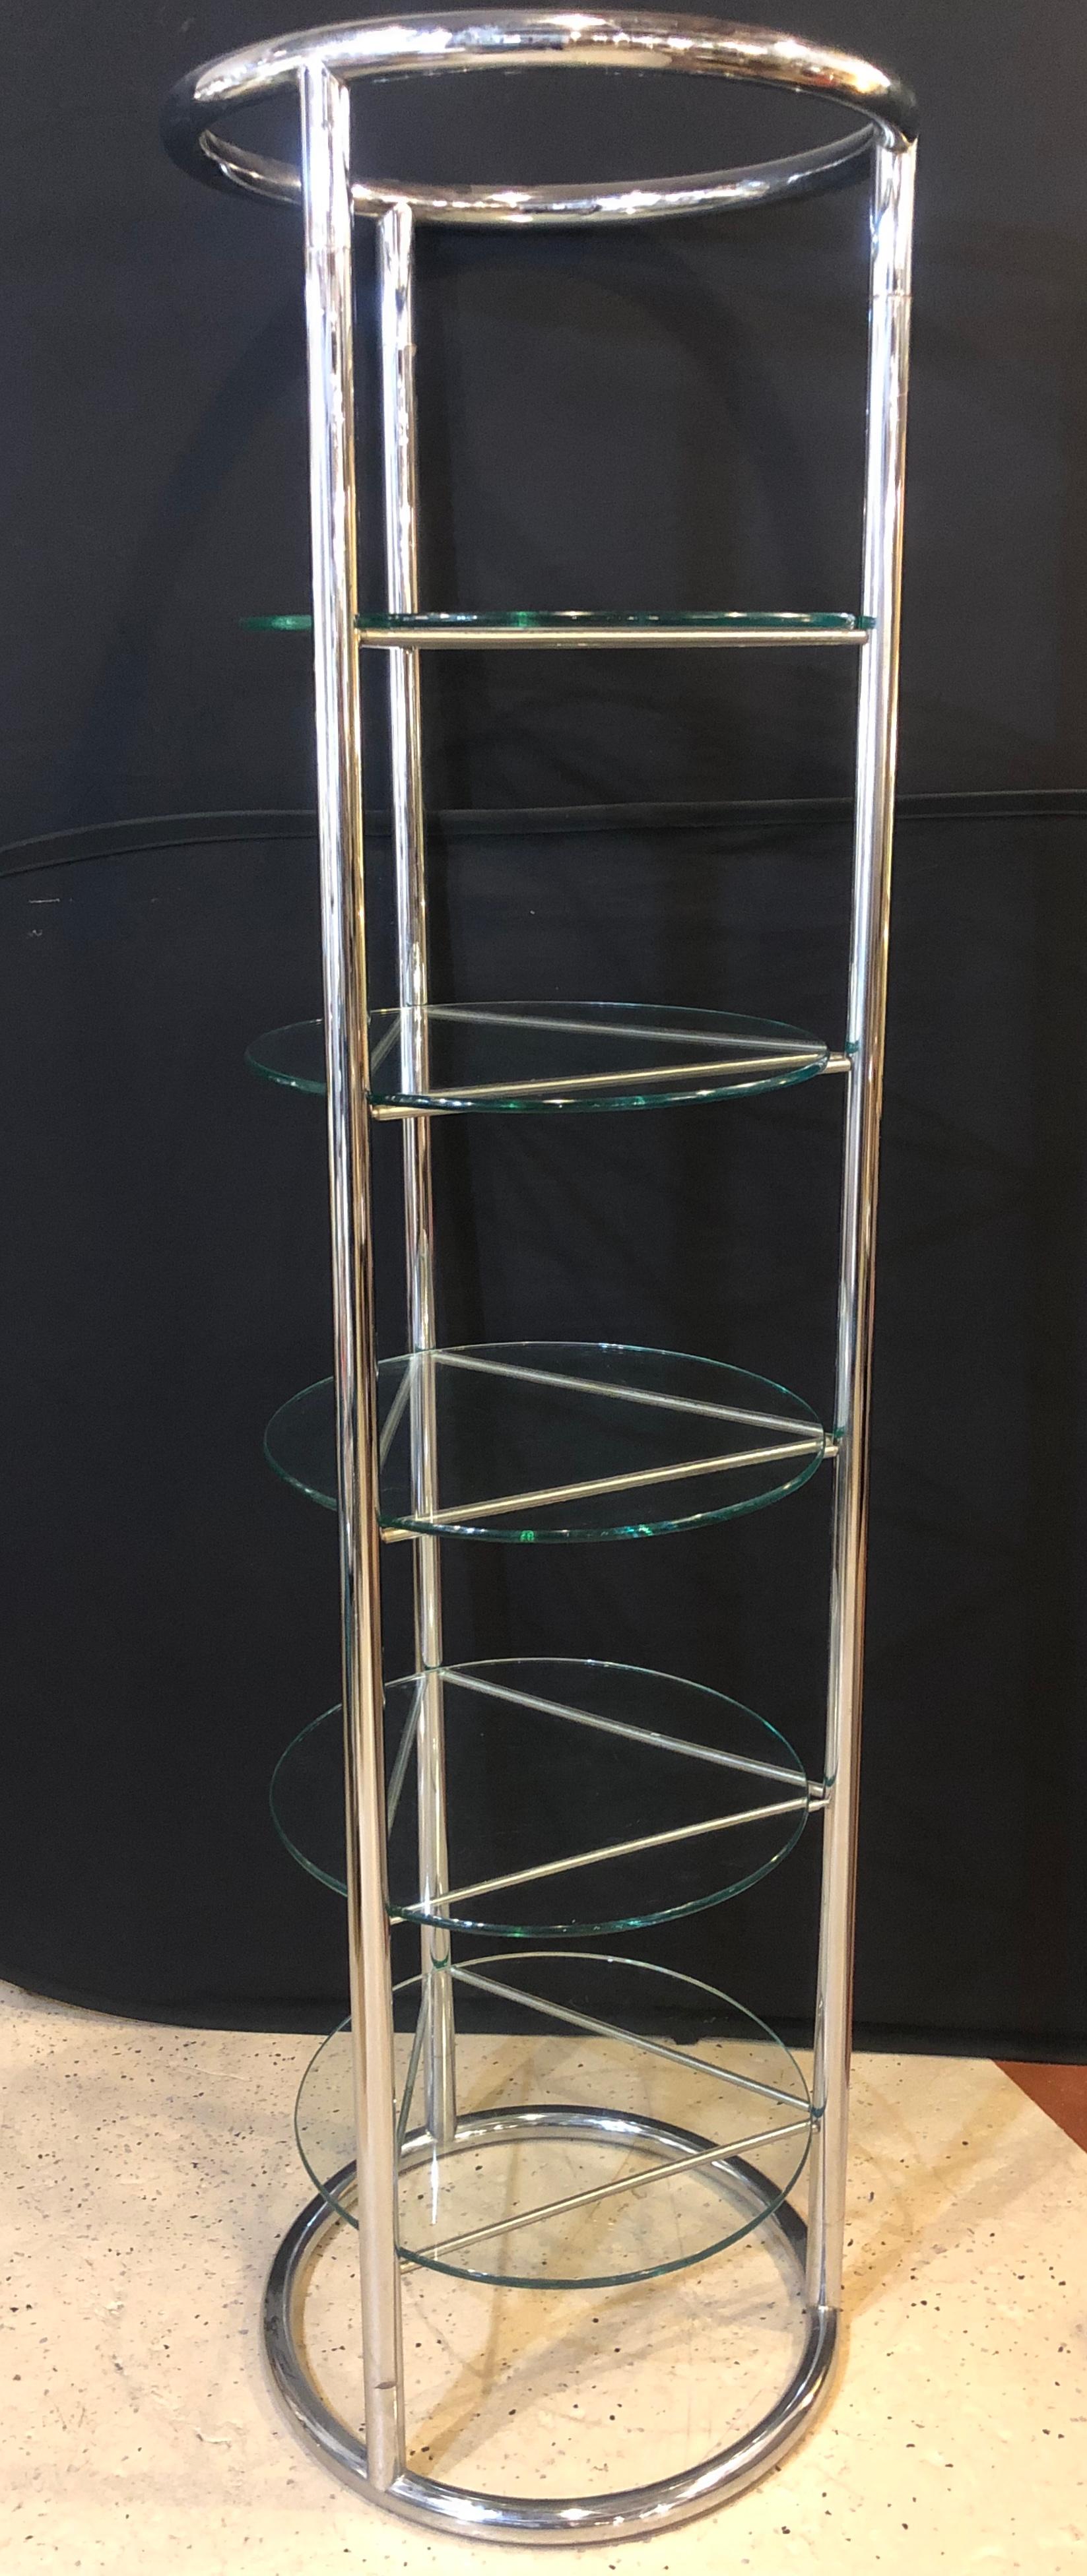 Chrome and glass modern tubular five tier étagère / shelf. A fine strong and stable shelving unit in the Hollywood Regency manner.